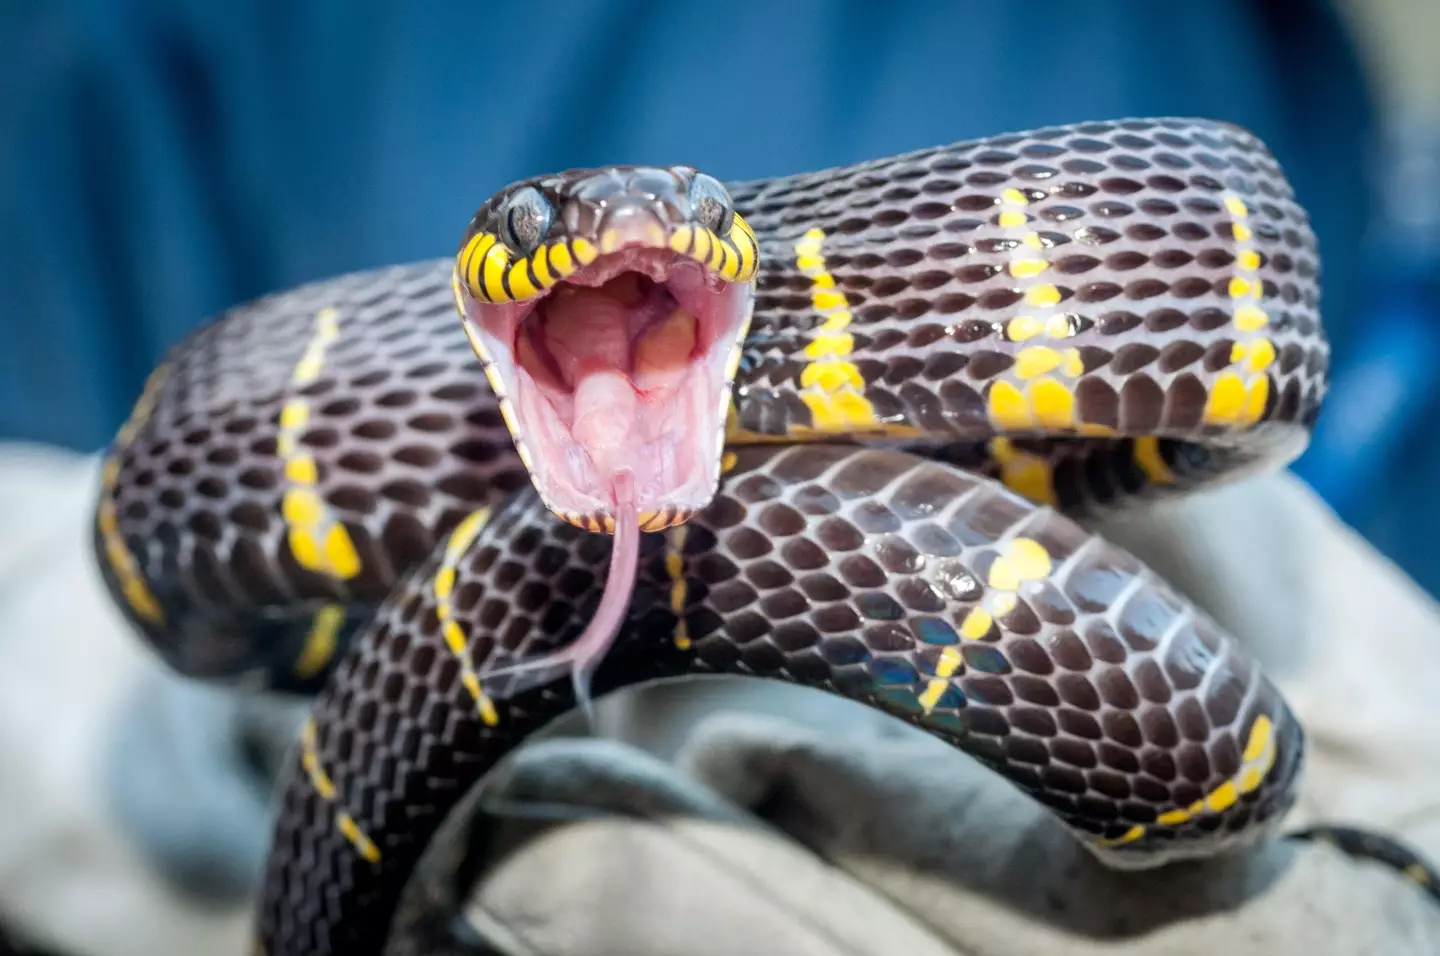 Snake bites were found to have mostly occurred in males.